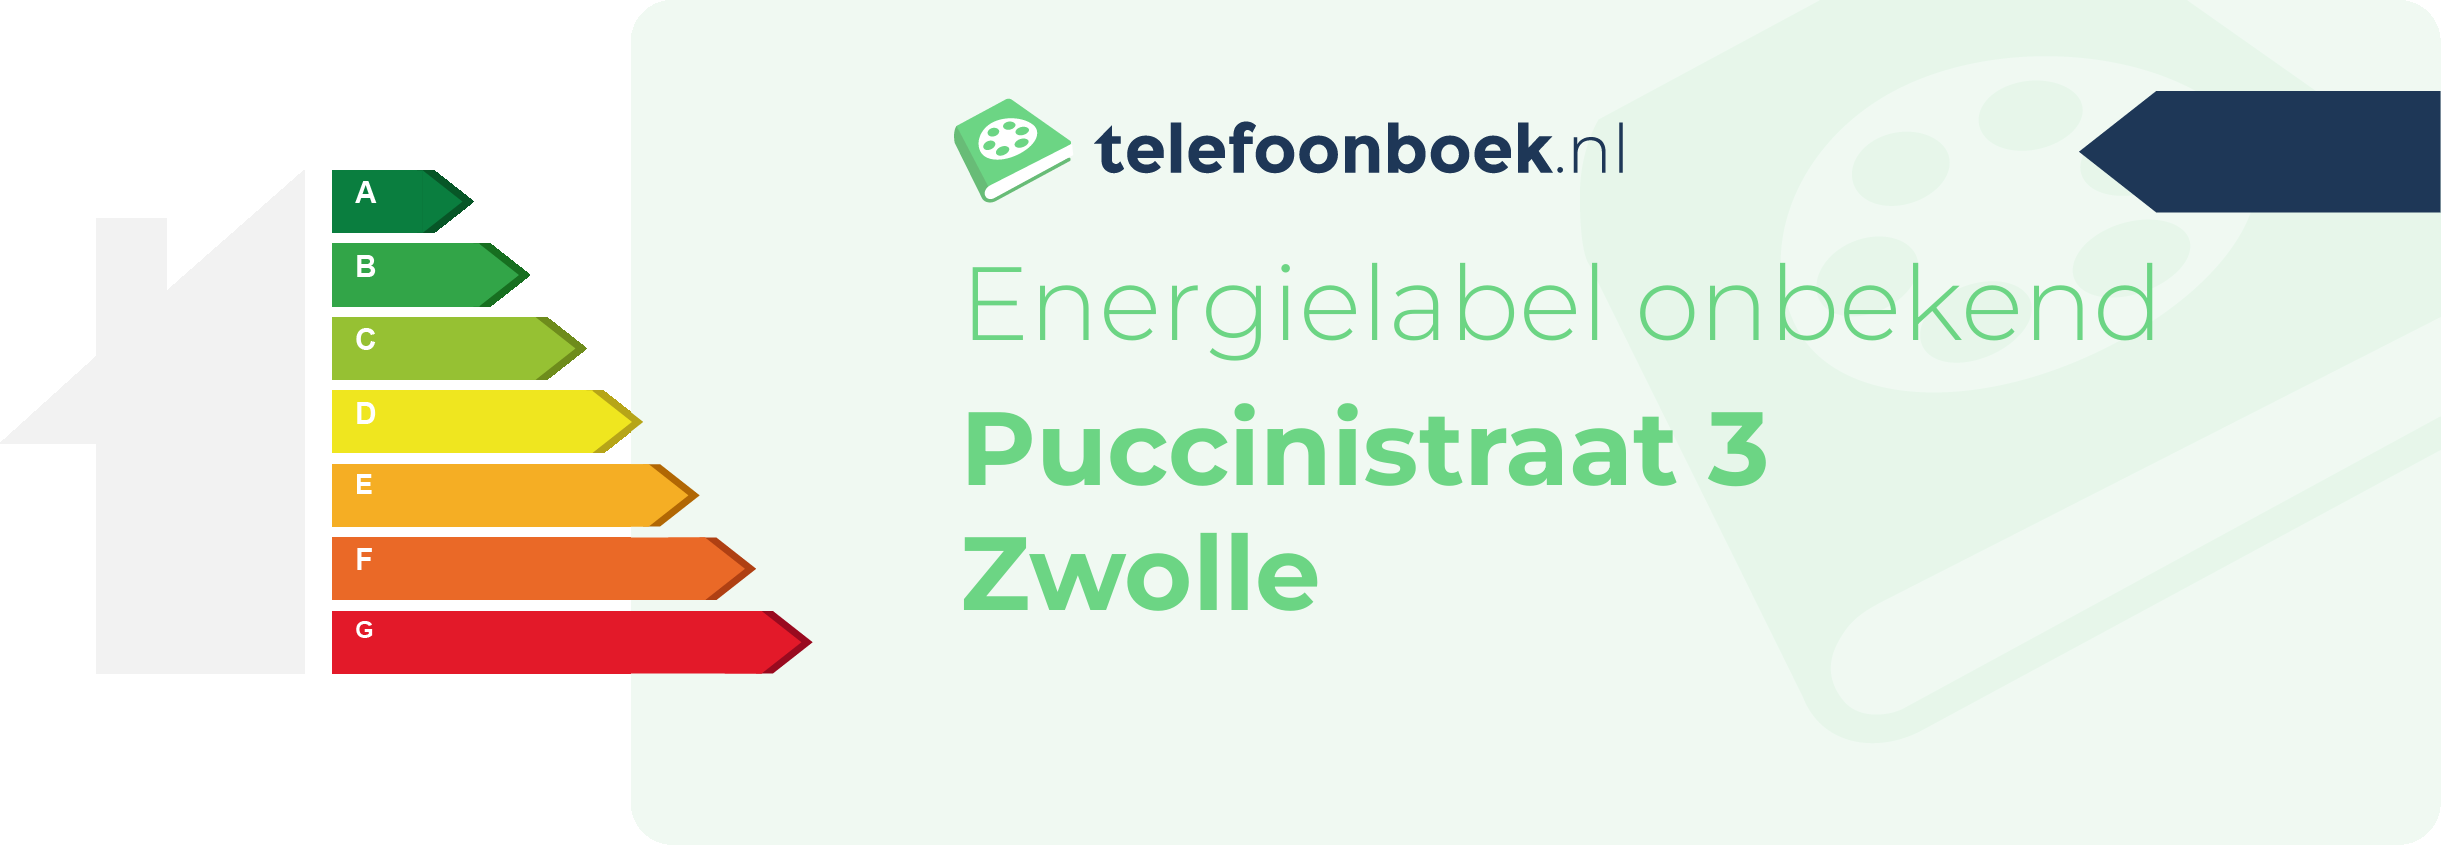 Energielabel Puccinistraat 3 Zwolle